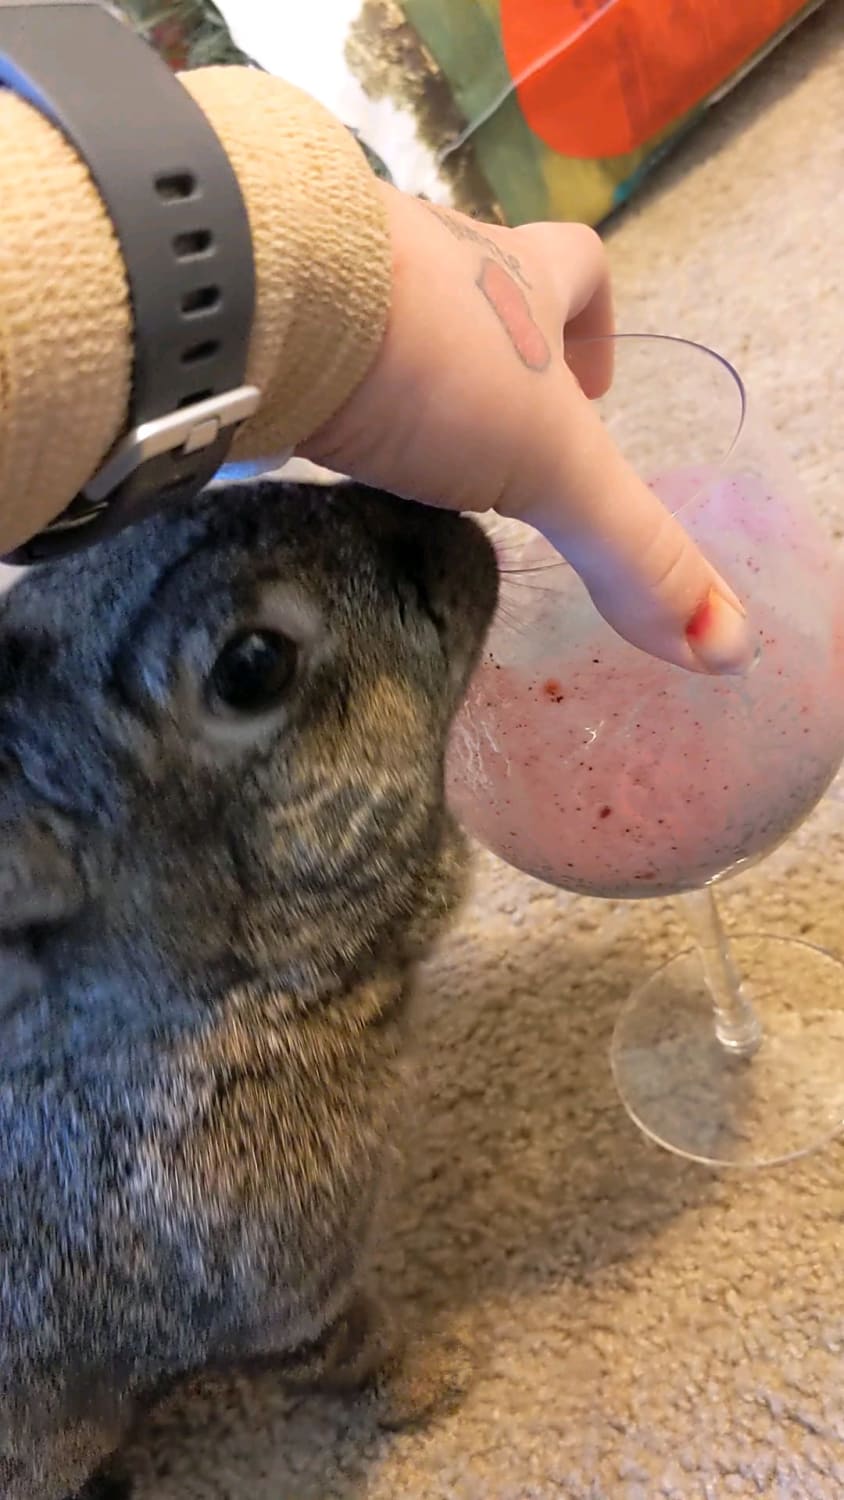 Trying to drink my morning smoothie over here and all she wants to do is eat the glass!